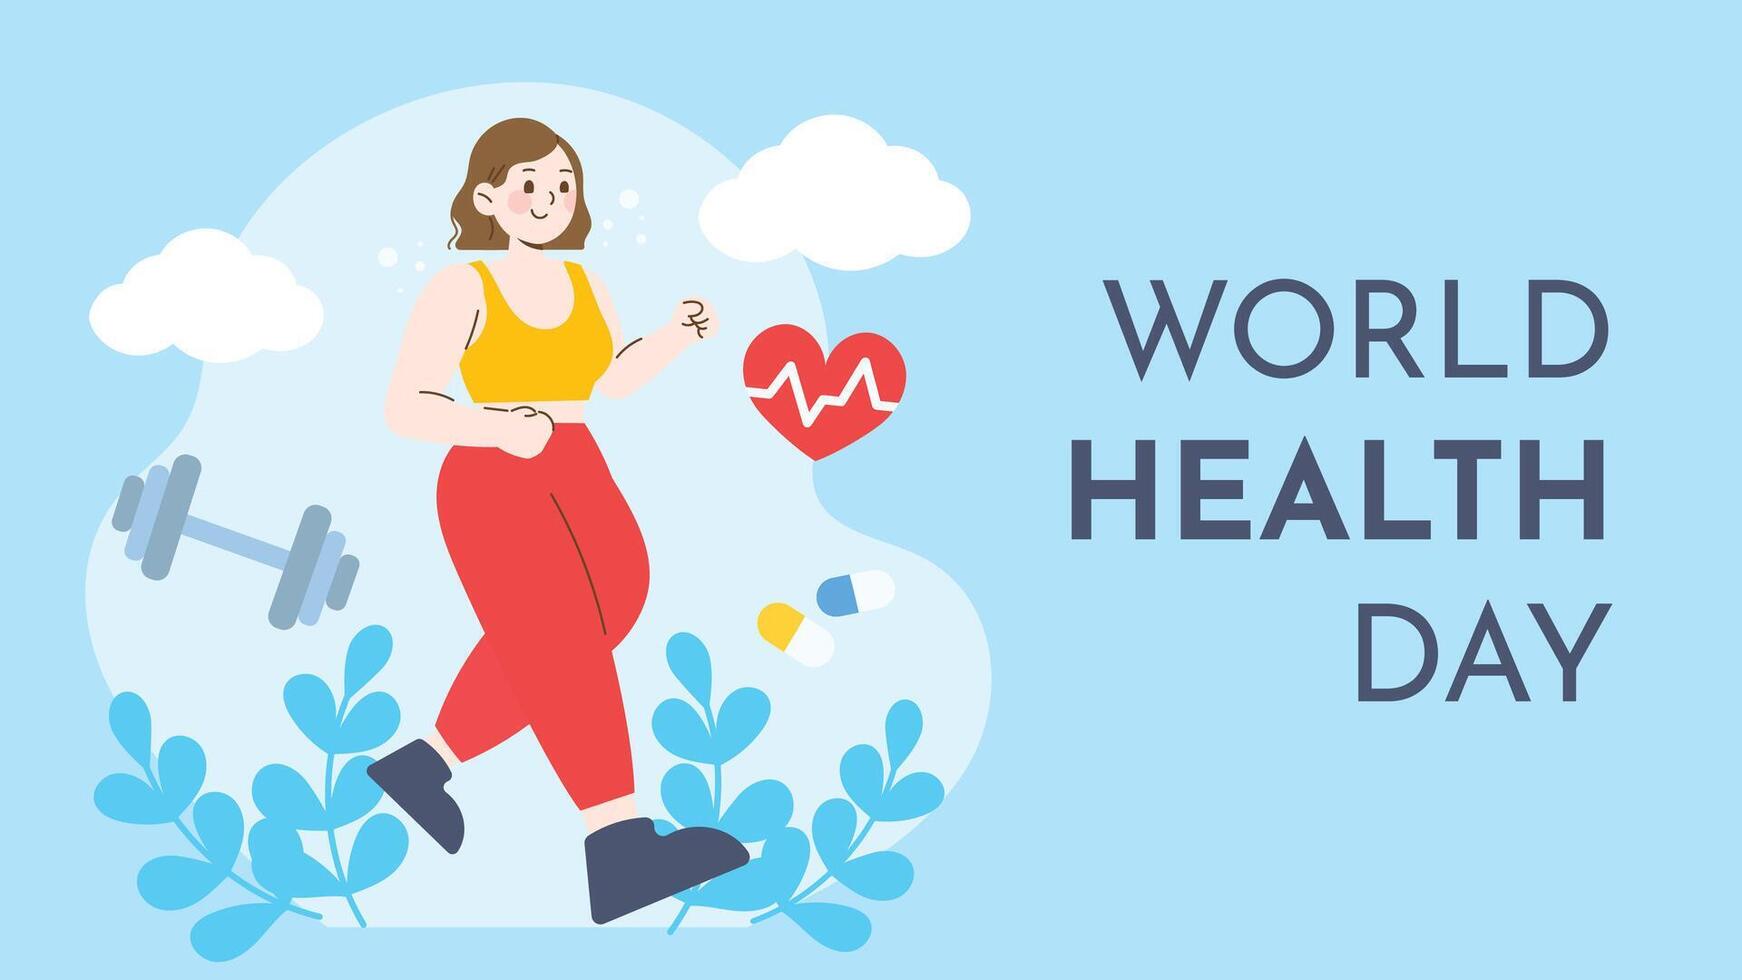 World health day concept, 7 April, background vector. Hand drawn comic doodle style of people working out, exercise, leaves, heart. Design for web, banner, campaign, social media post. vector